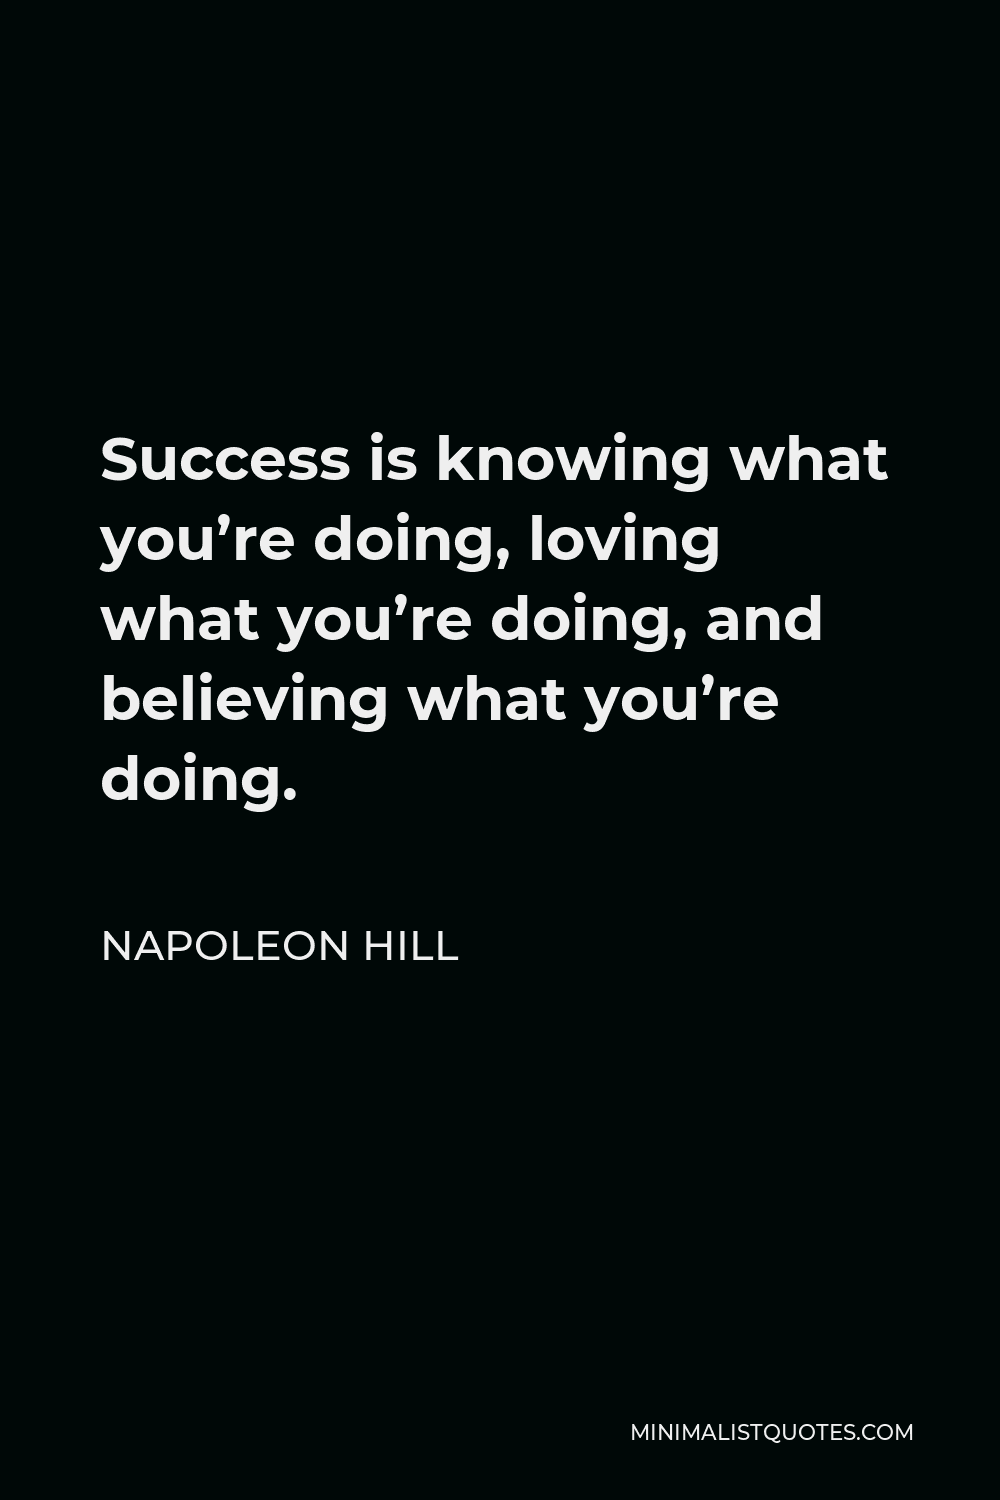 Napoleon Hill Quote: Success is knowing what you're doing, loving what ...